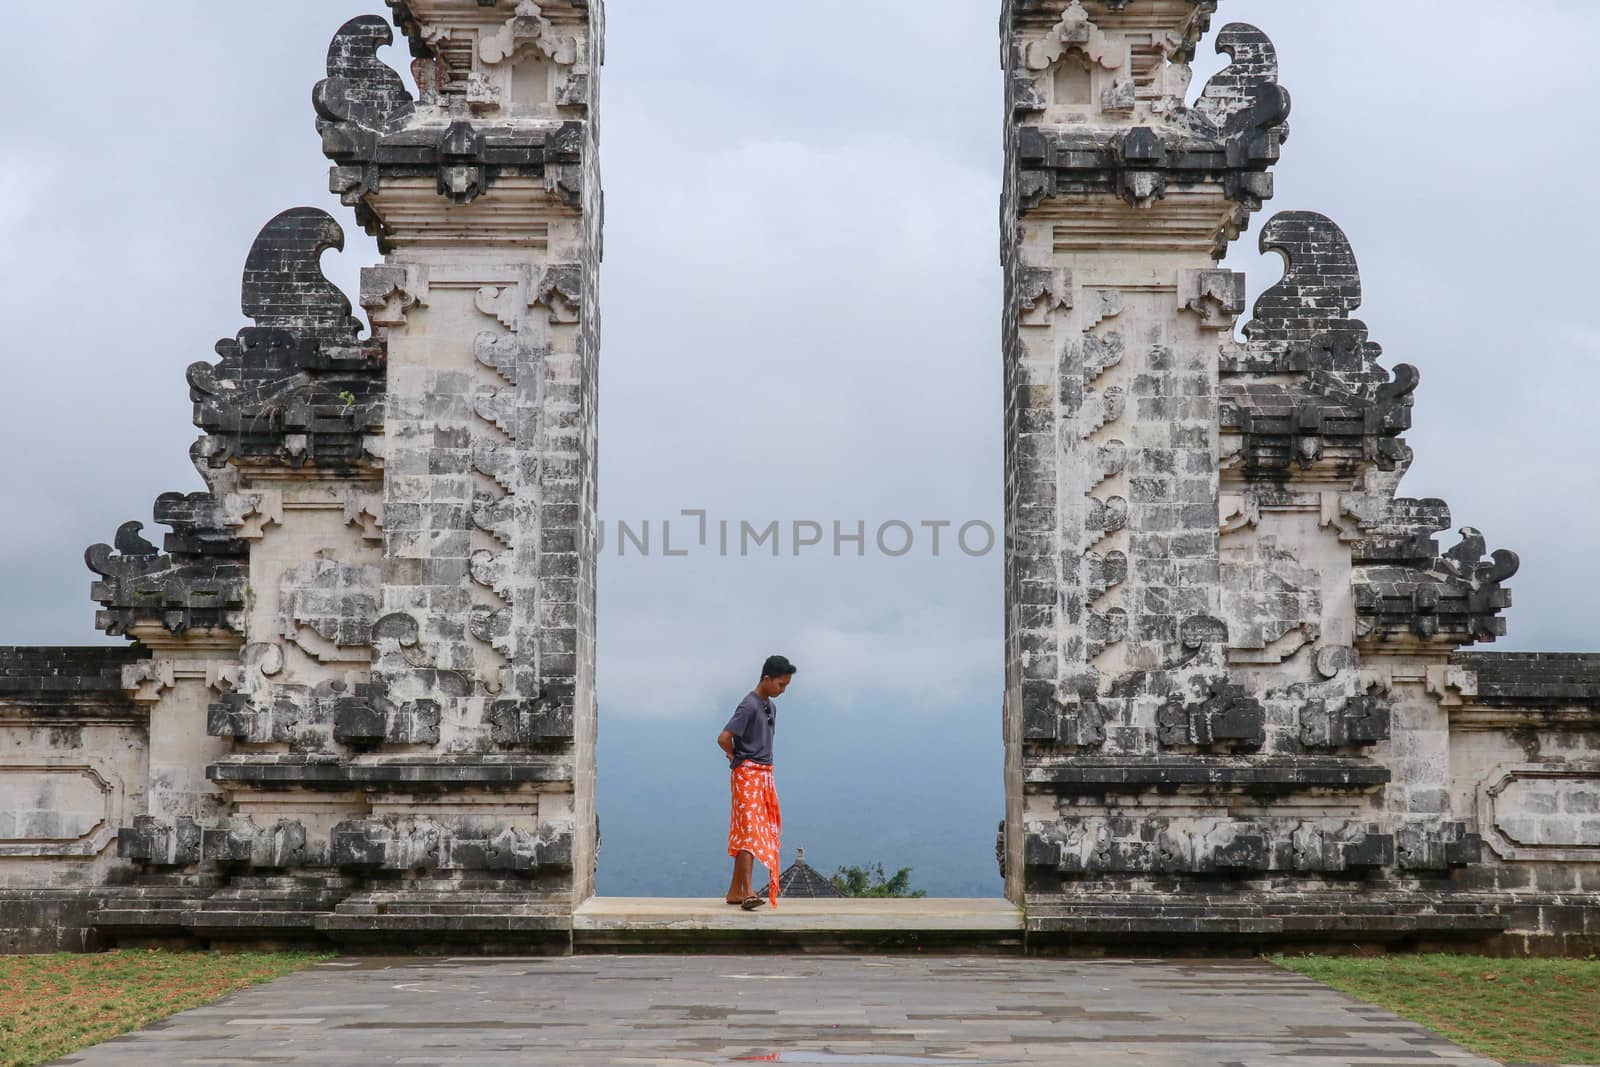 Architecture, traveling and religion. Young traveler enjoying the view in Hindu temple Lempuyang in Bali, Indonesia.